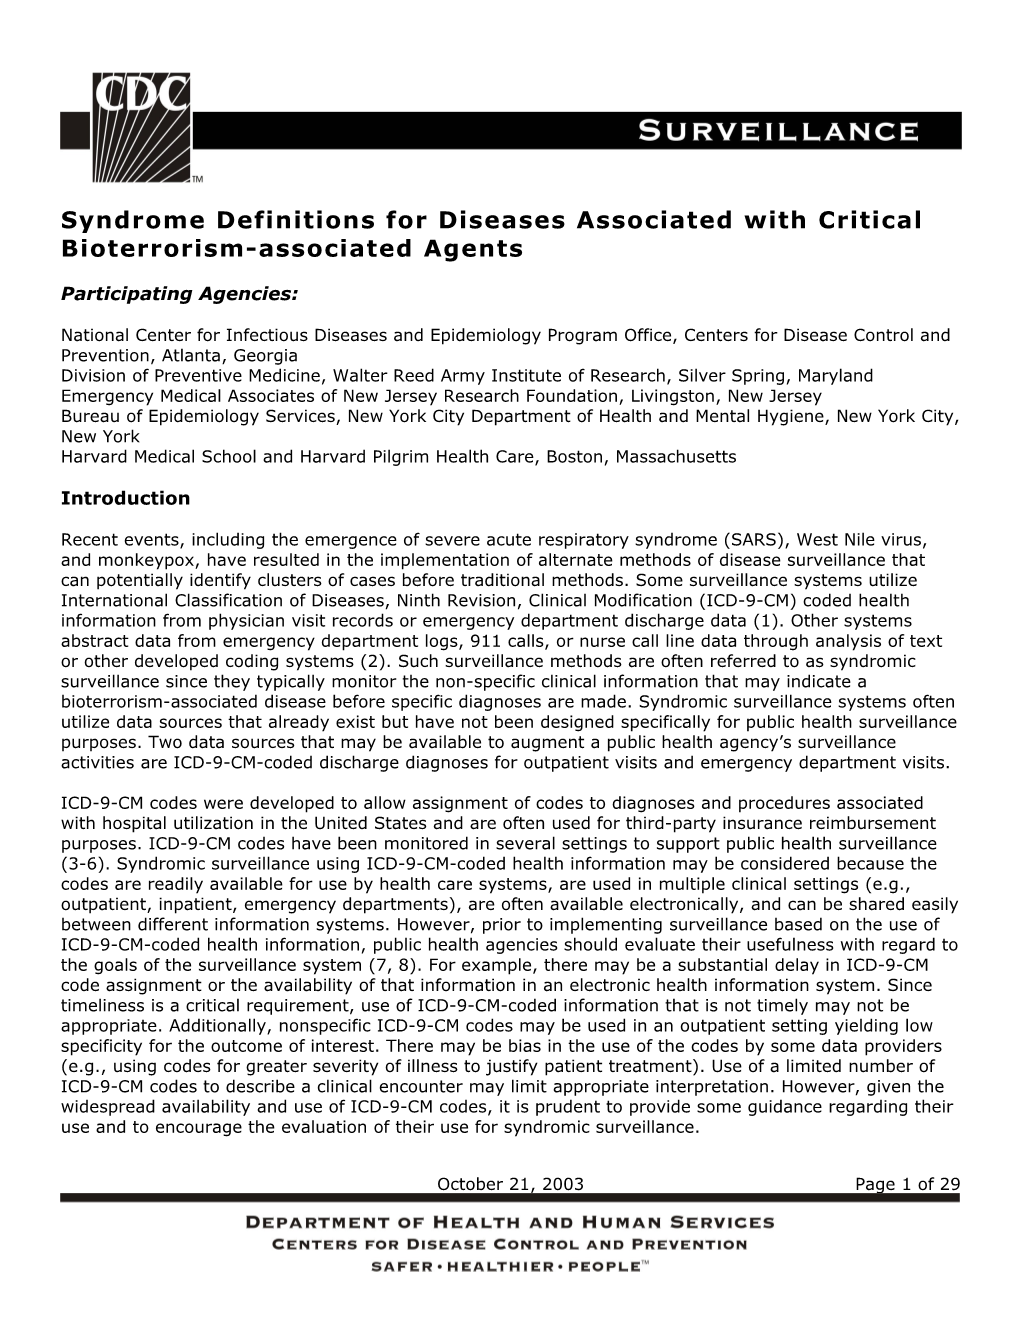 Syndrome Definitions for Diseases Associated with Critical Bioterrorism-Associated Agents